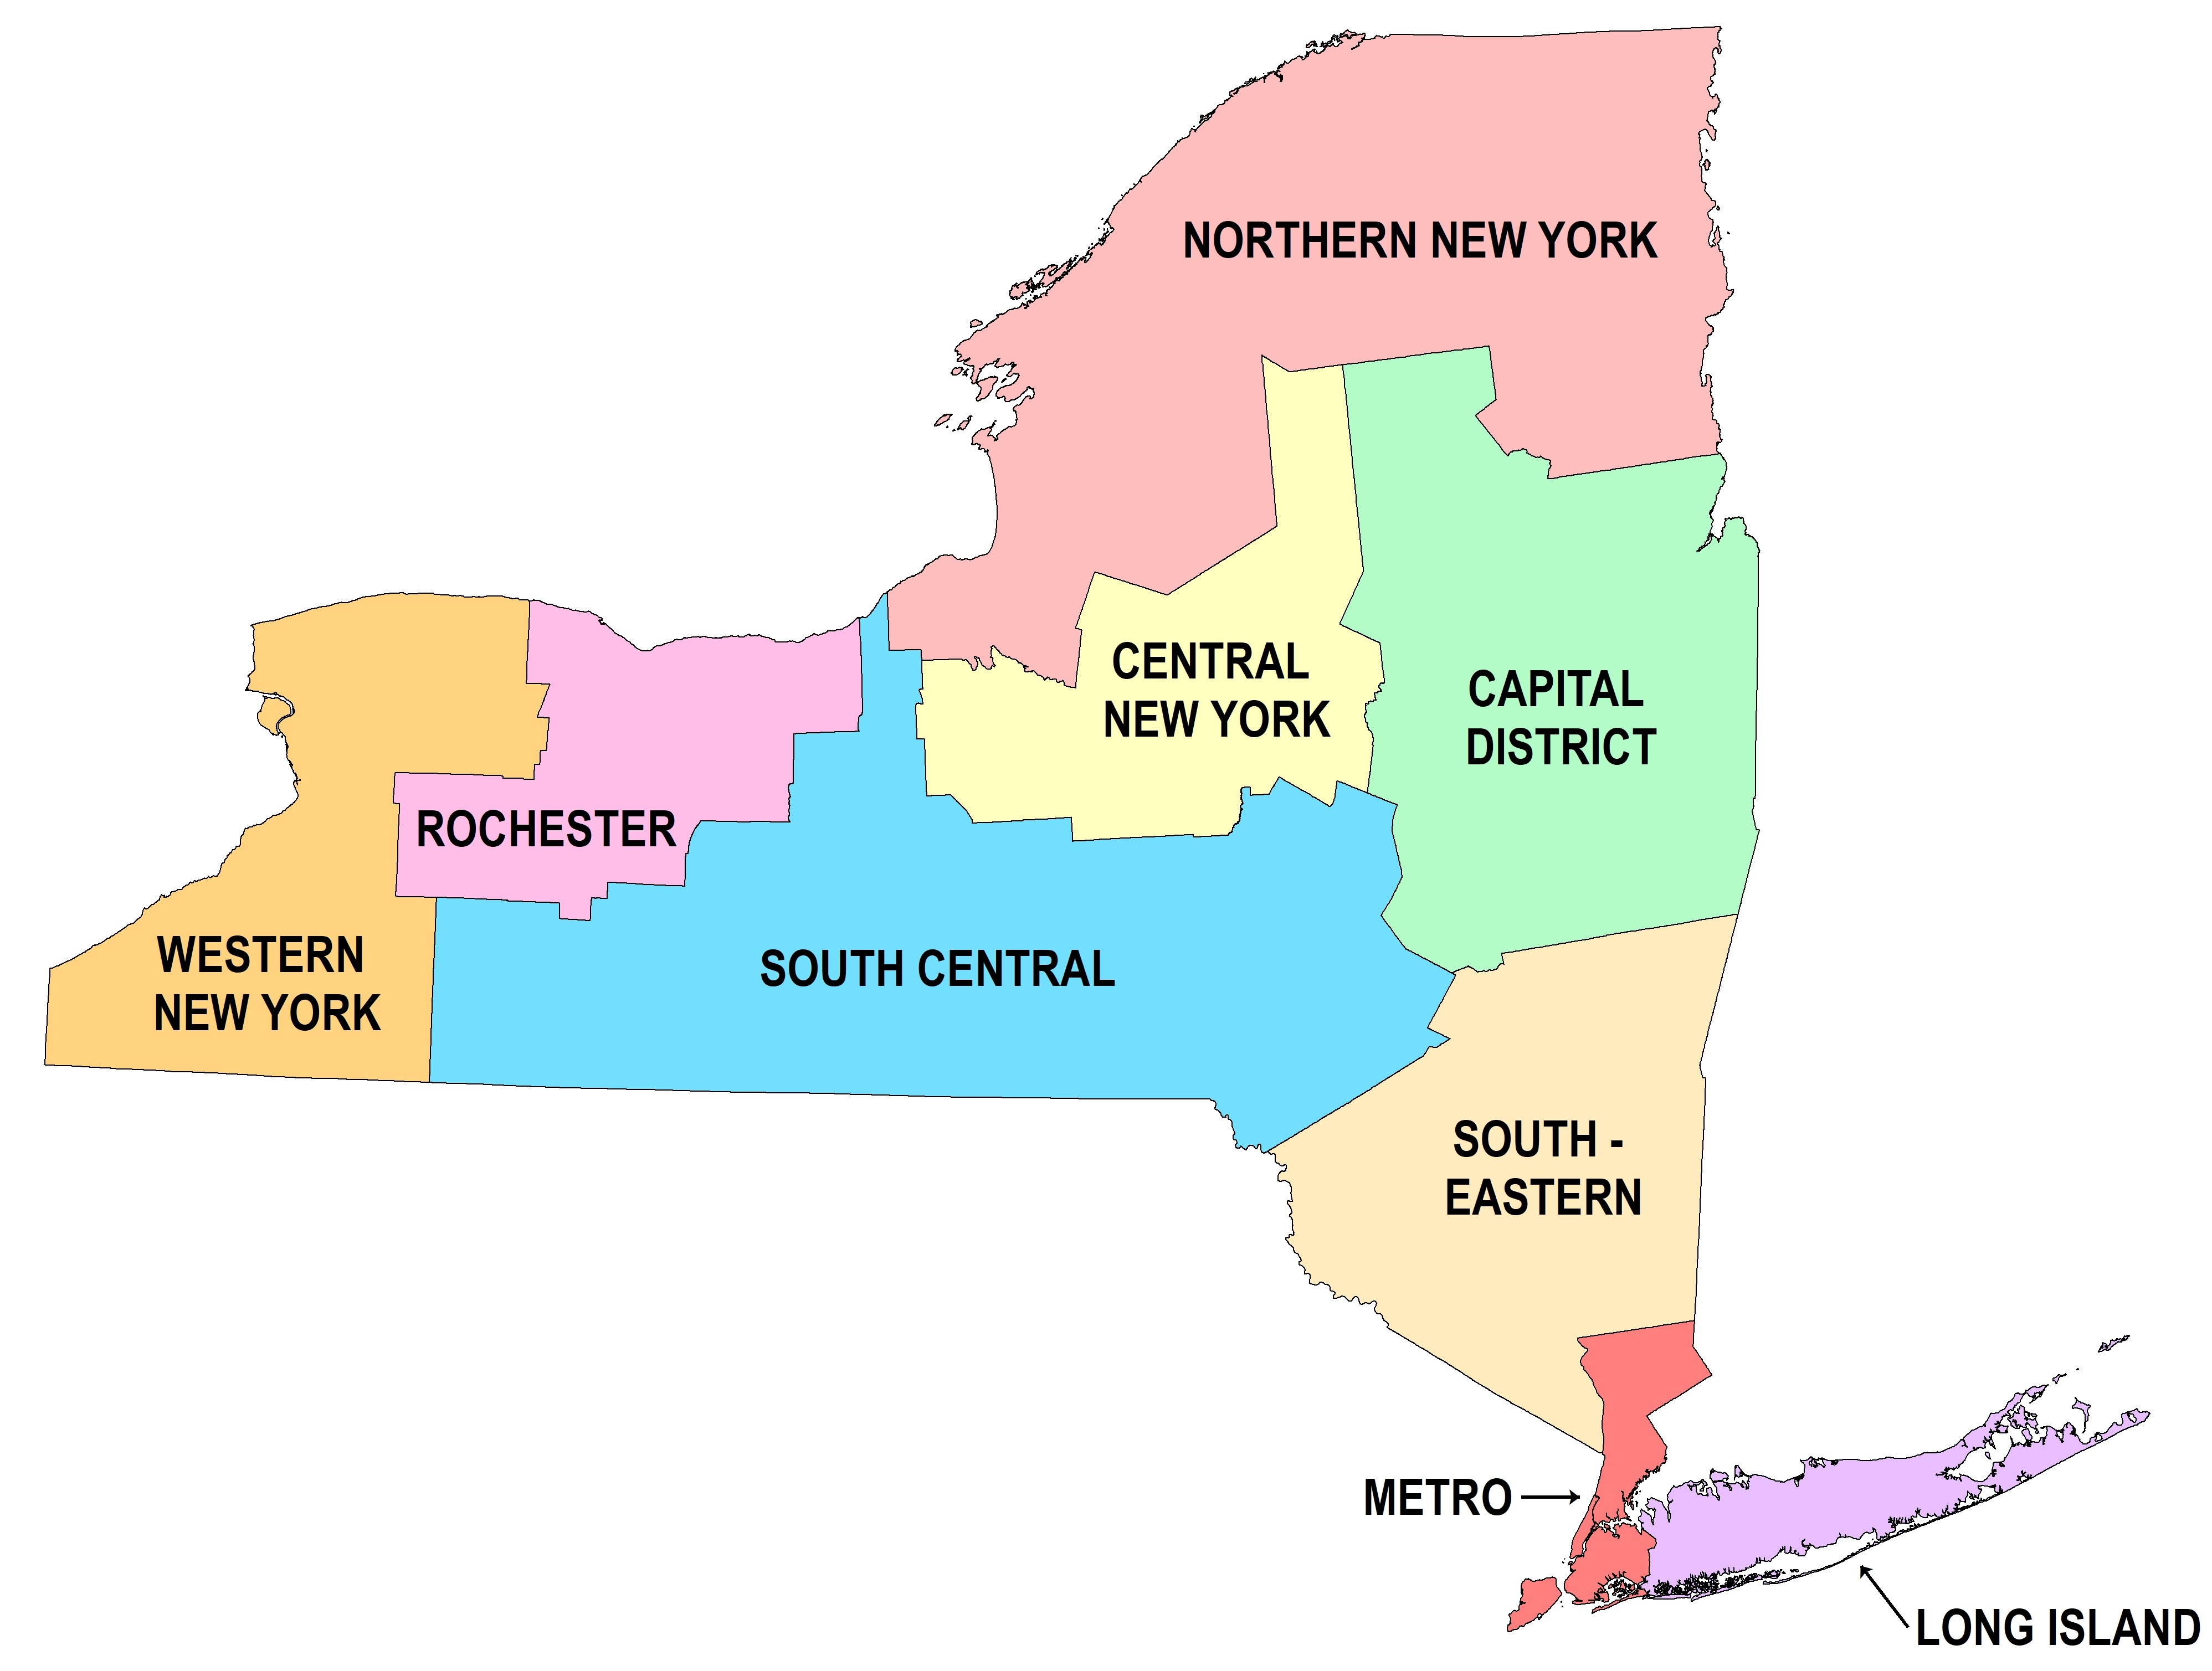 Image map of reference and research library resources systems in New York State